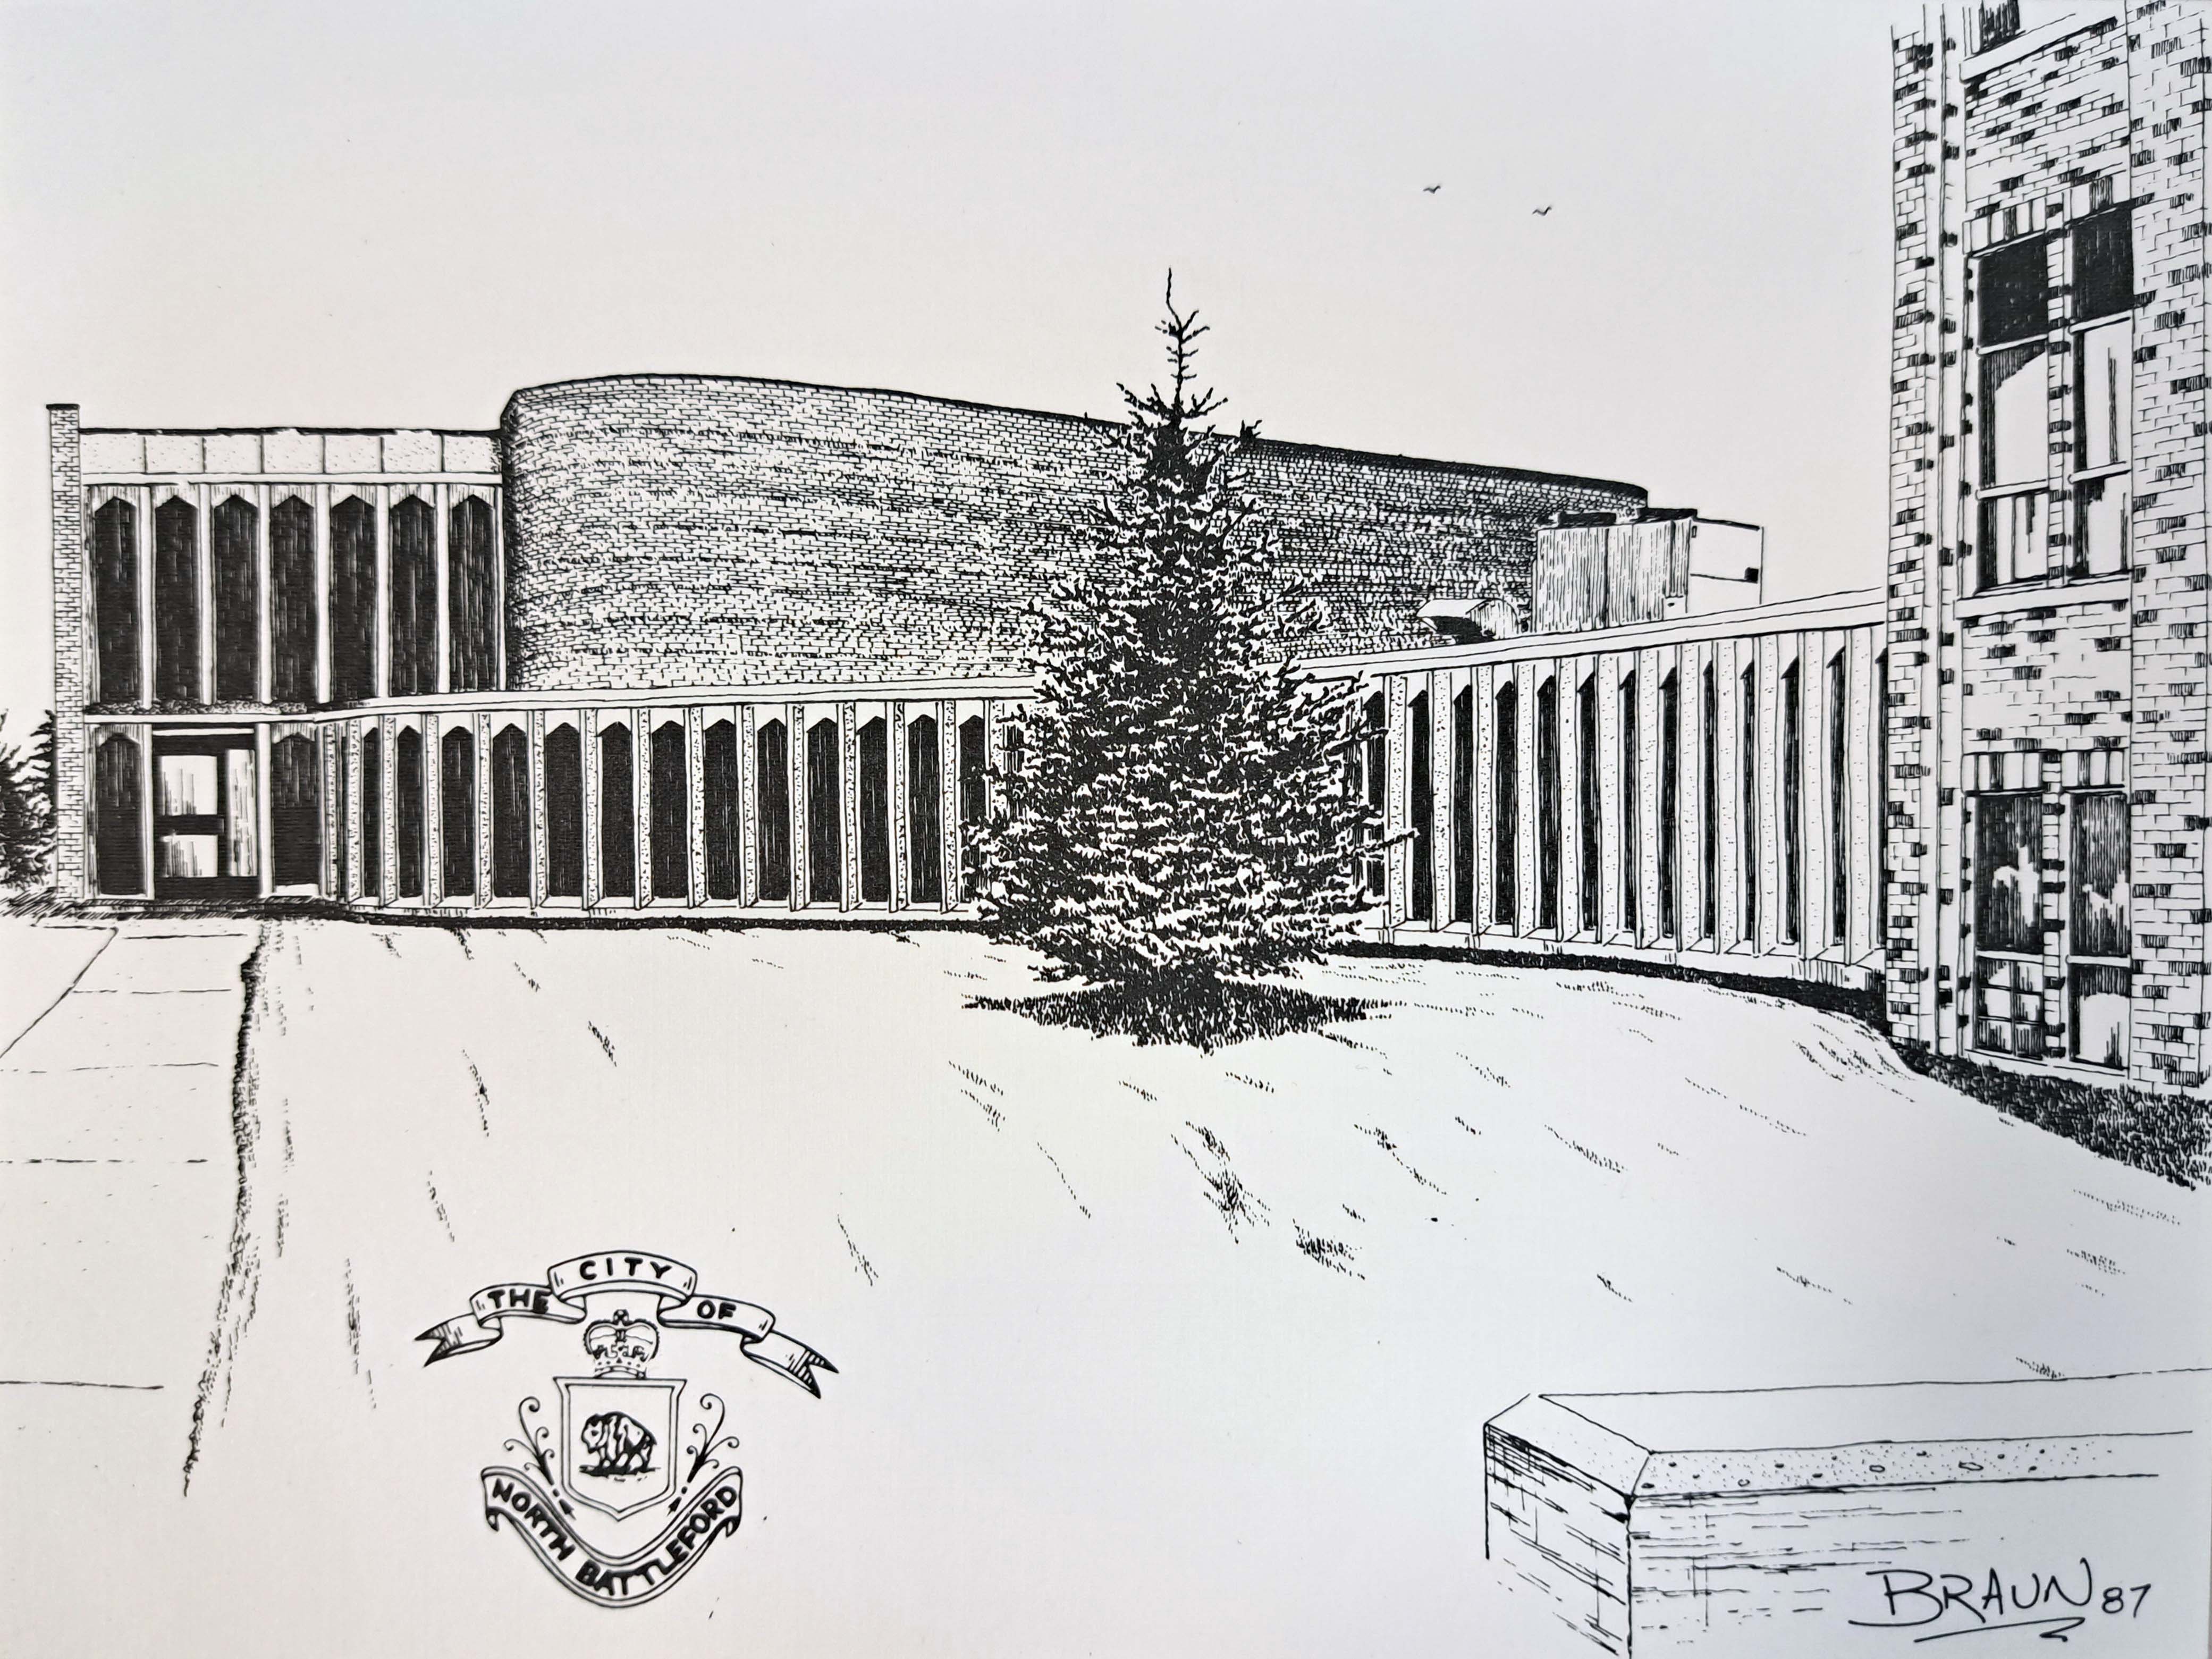 Ink Image of Chapel Gallery by Artist Braun